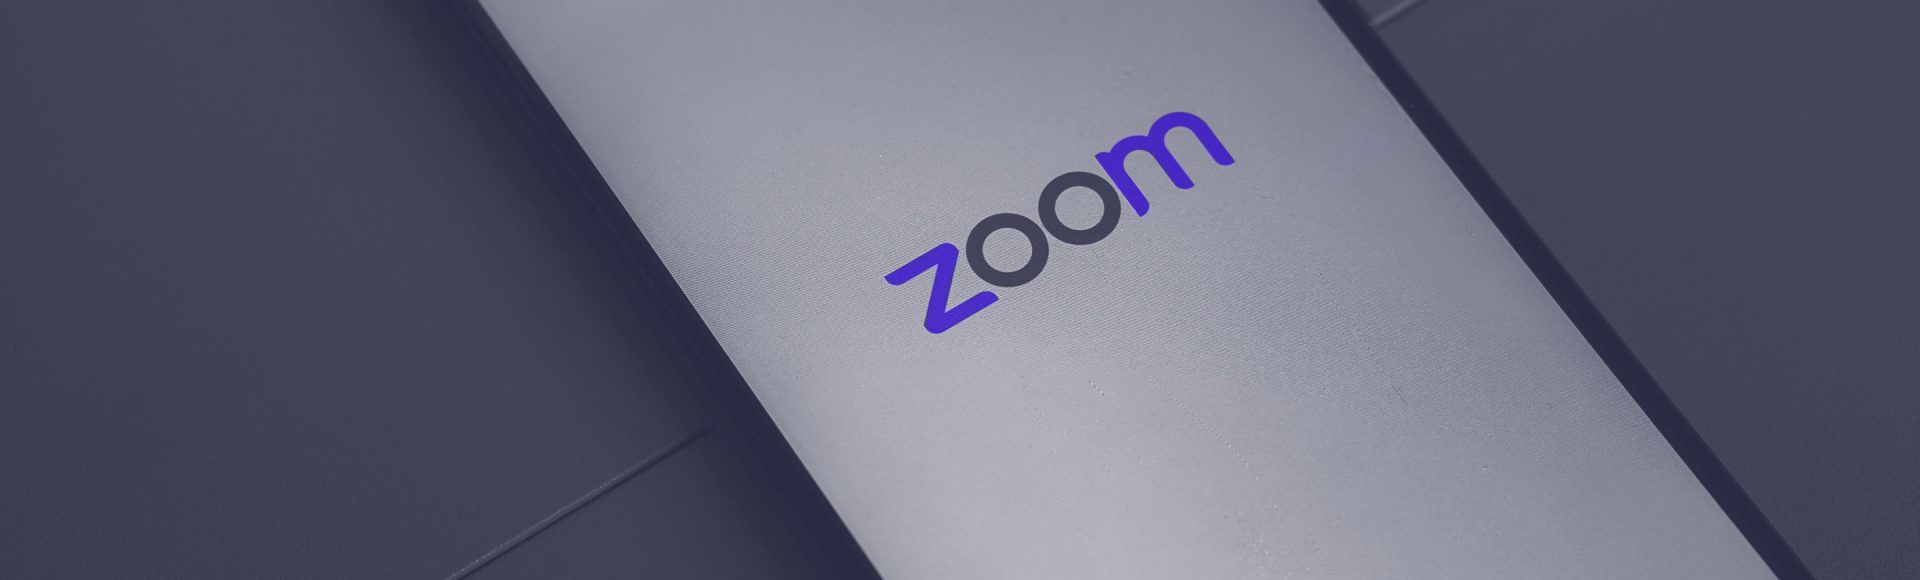 ARK’s Expected Value For Zoom Video Communications In 2026: $1,500 Per Share